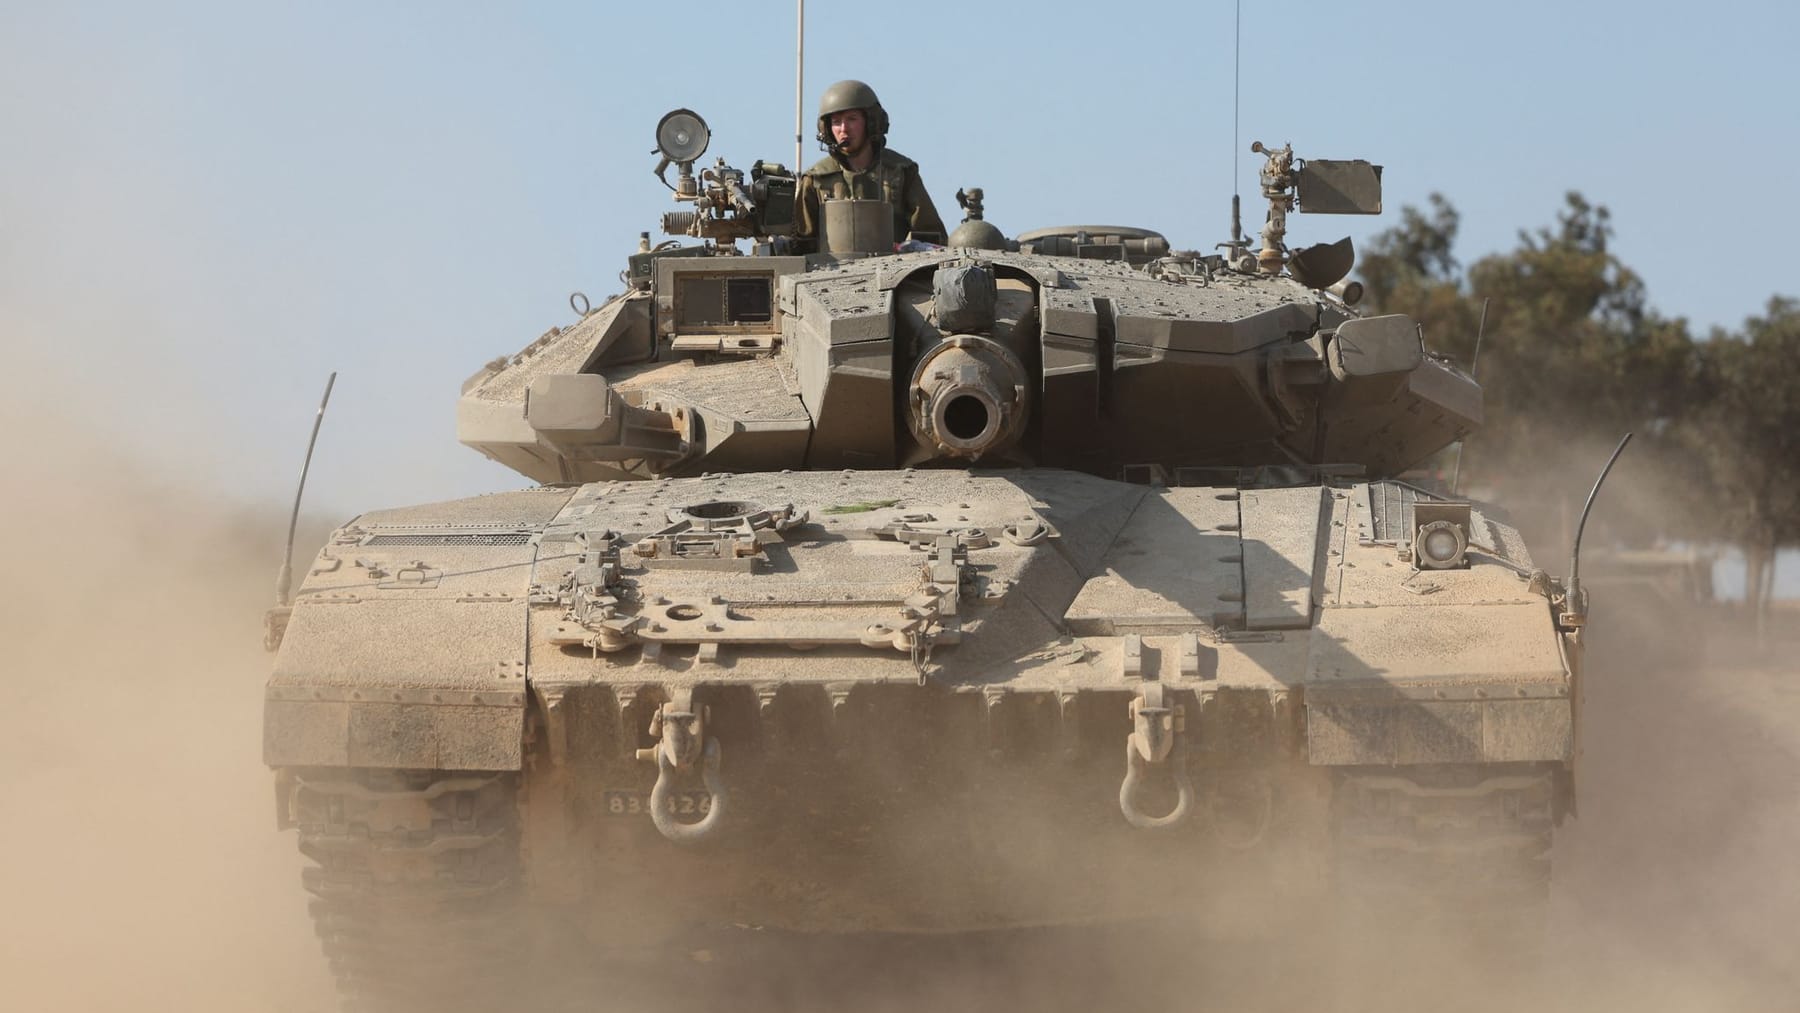 News about the attack on Israel – The army wants to attack Hamas on three fronts